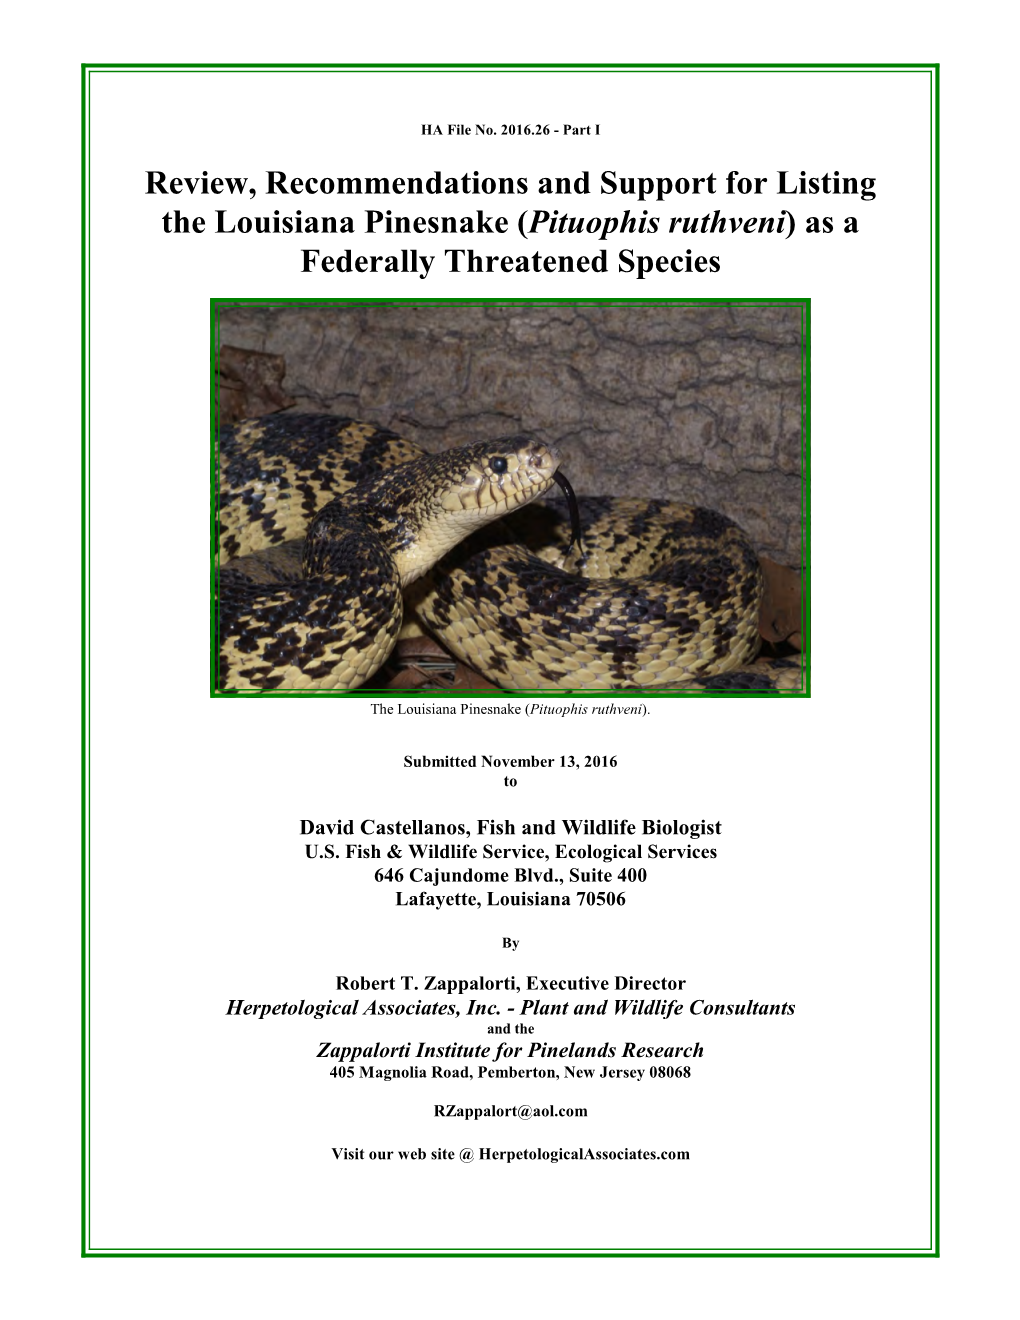 Review, Recommendations and Support for Listing the Louisiana Pinesnake (Pituophis Ruthveni) As a Federally Threatened Species